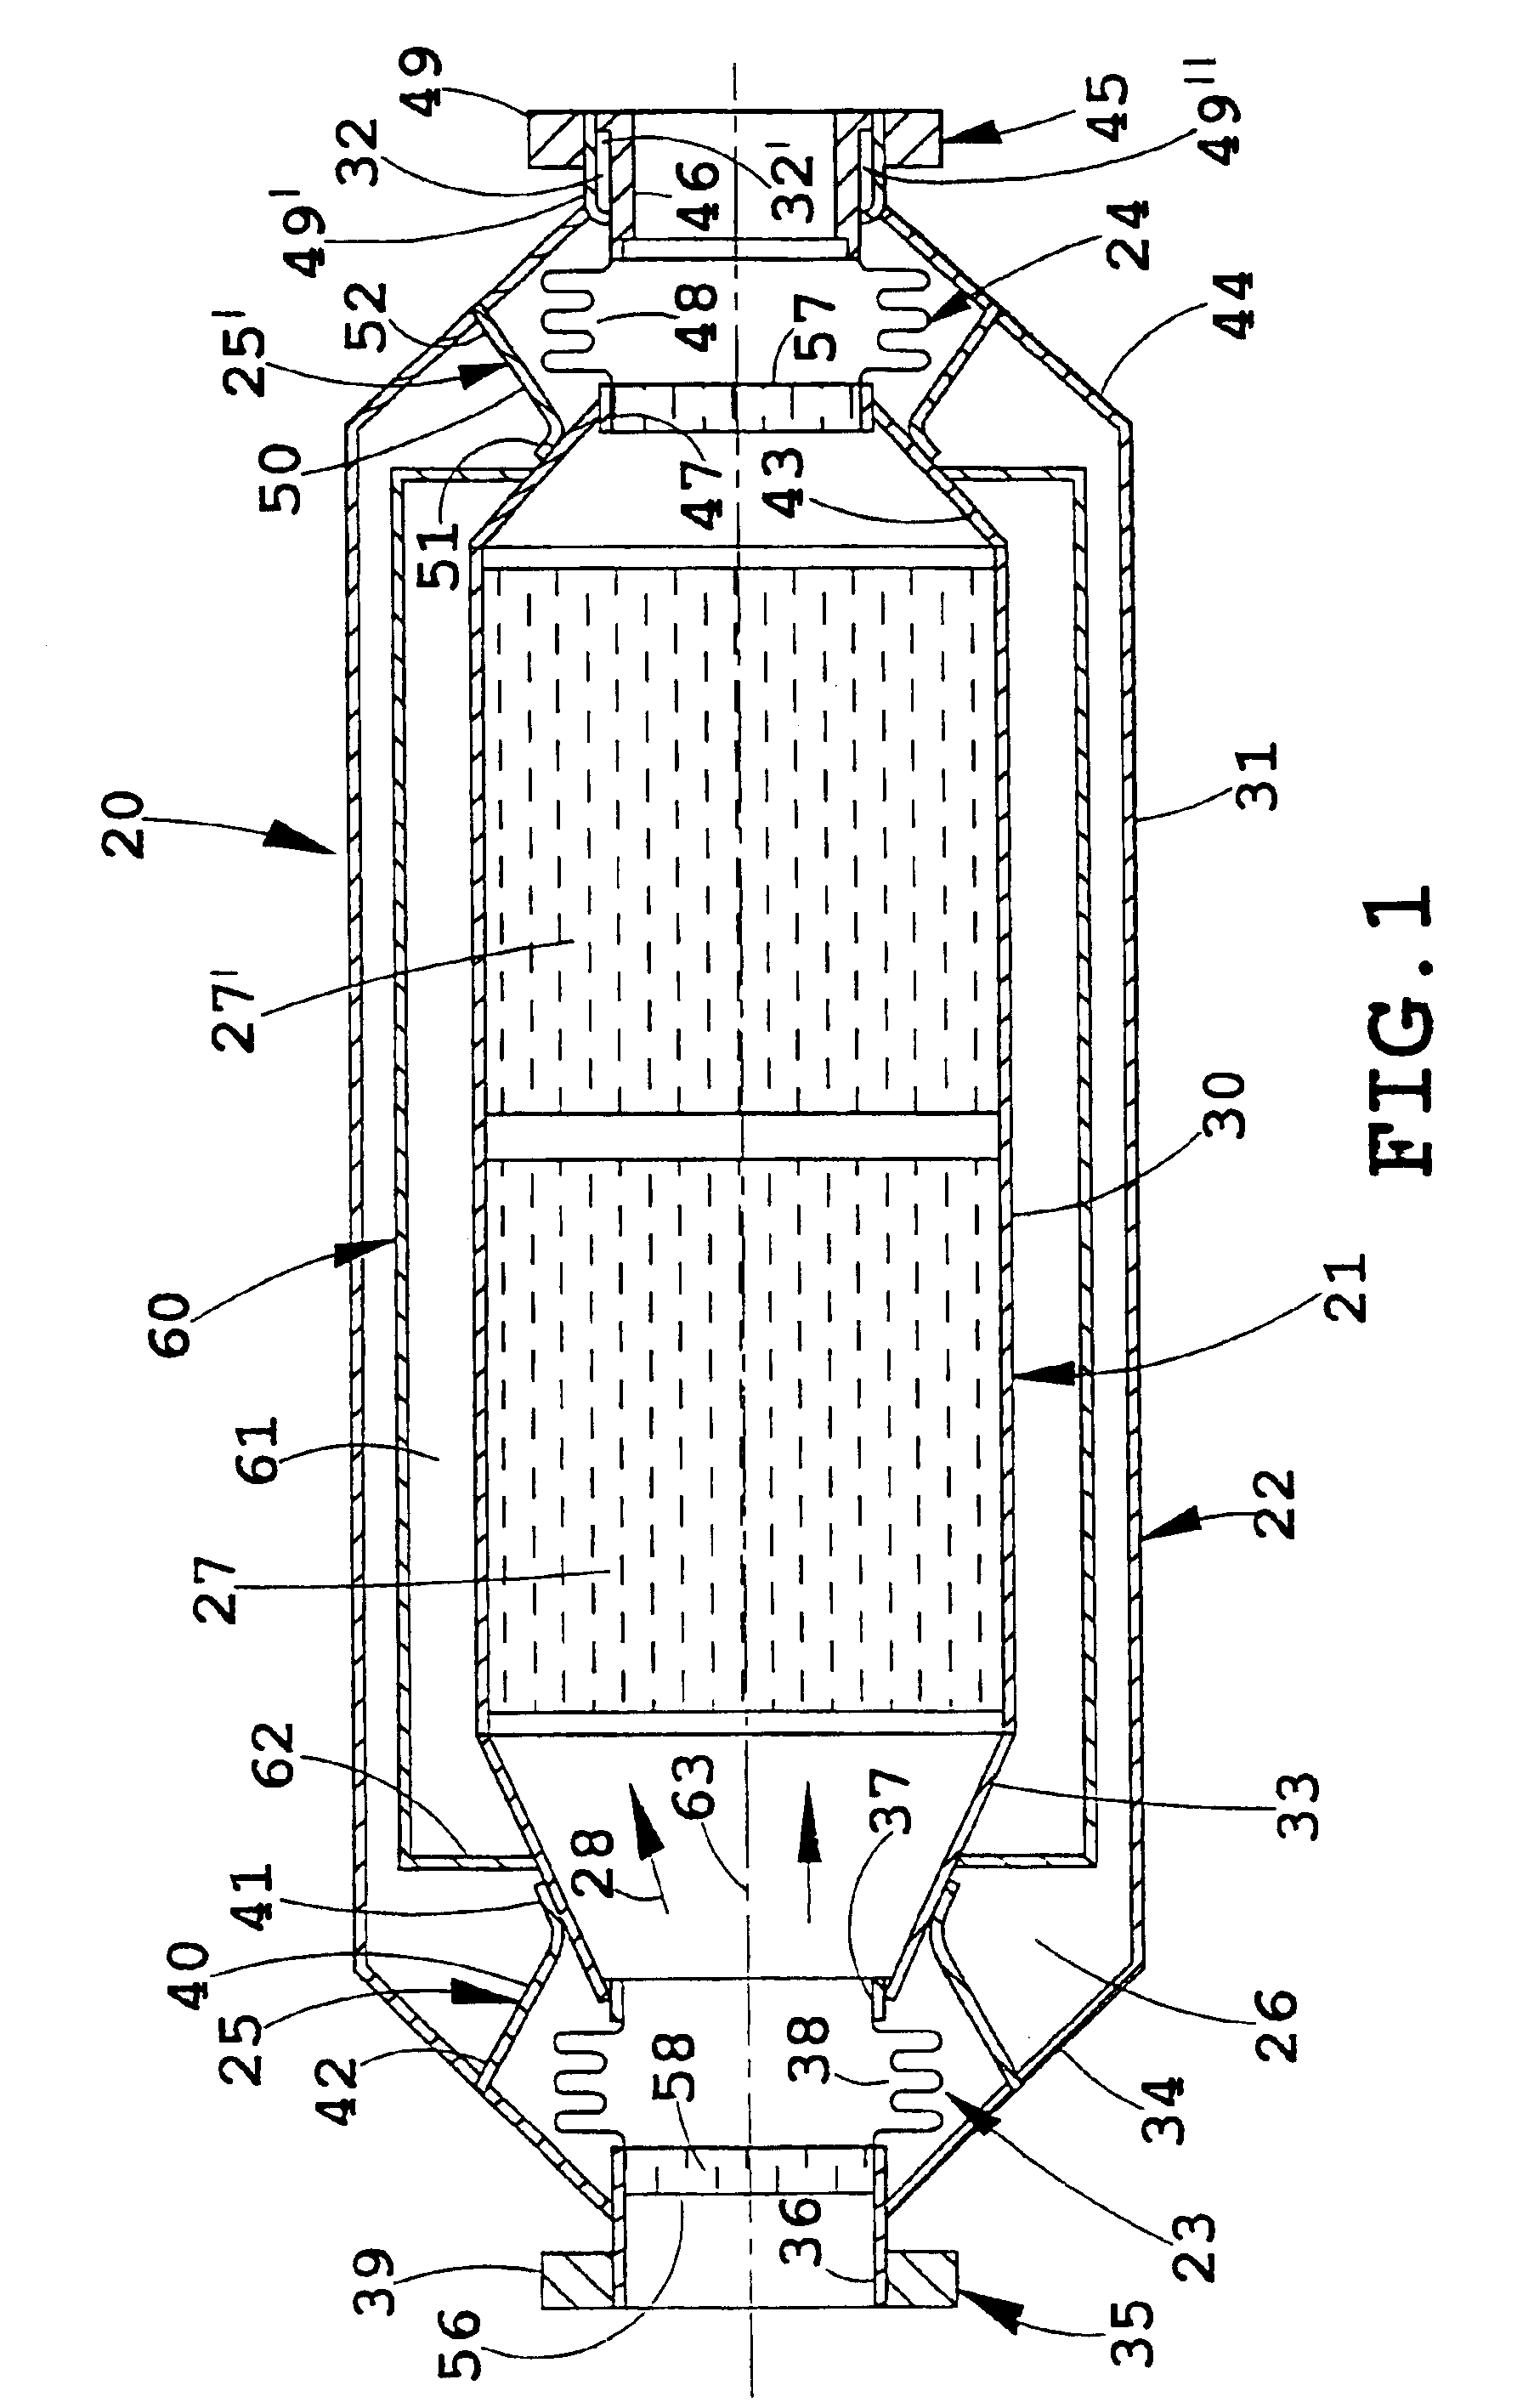 Vacuum-insulated exhaust treatment device with phase change materials and thermal management system